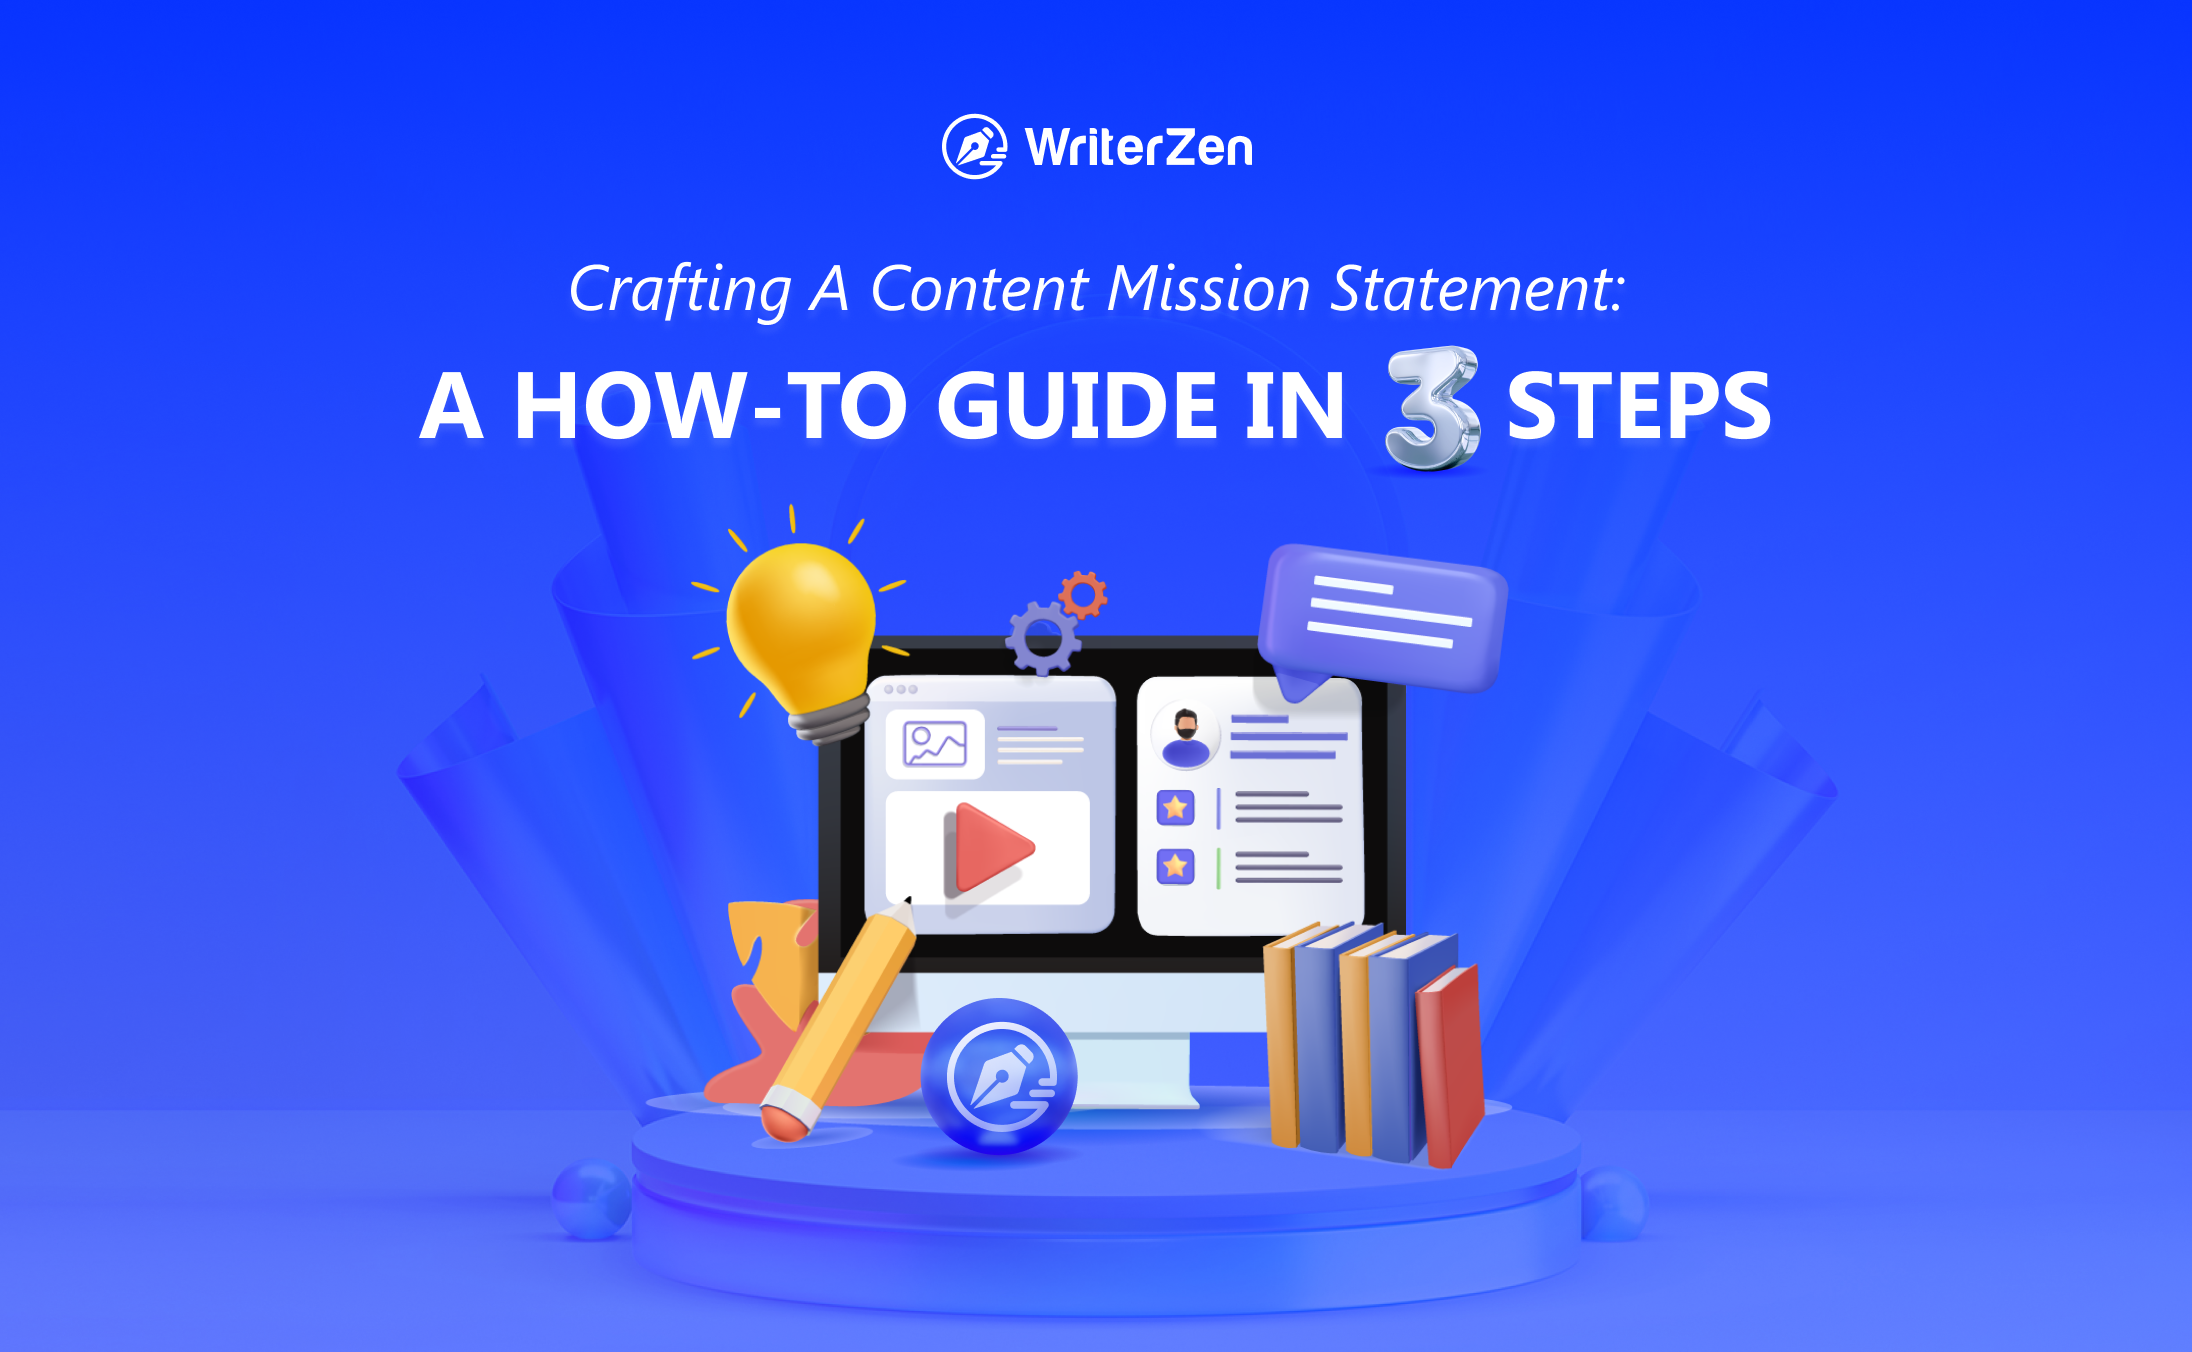 Crafting A Content Mission Statement: A How-To Guide In 3 Steps